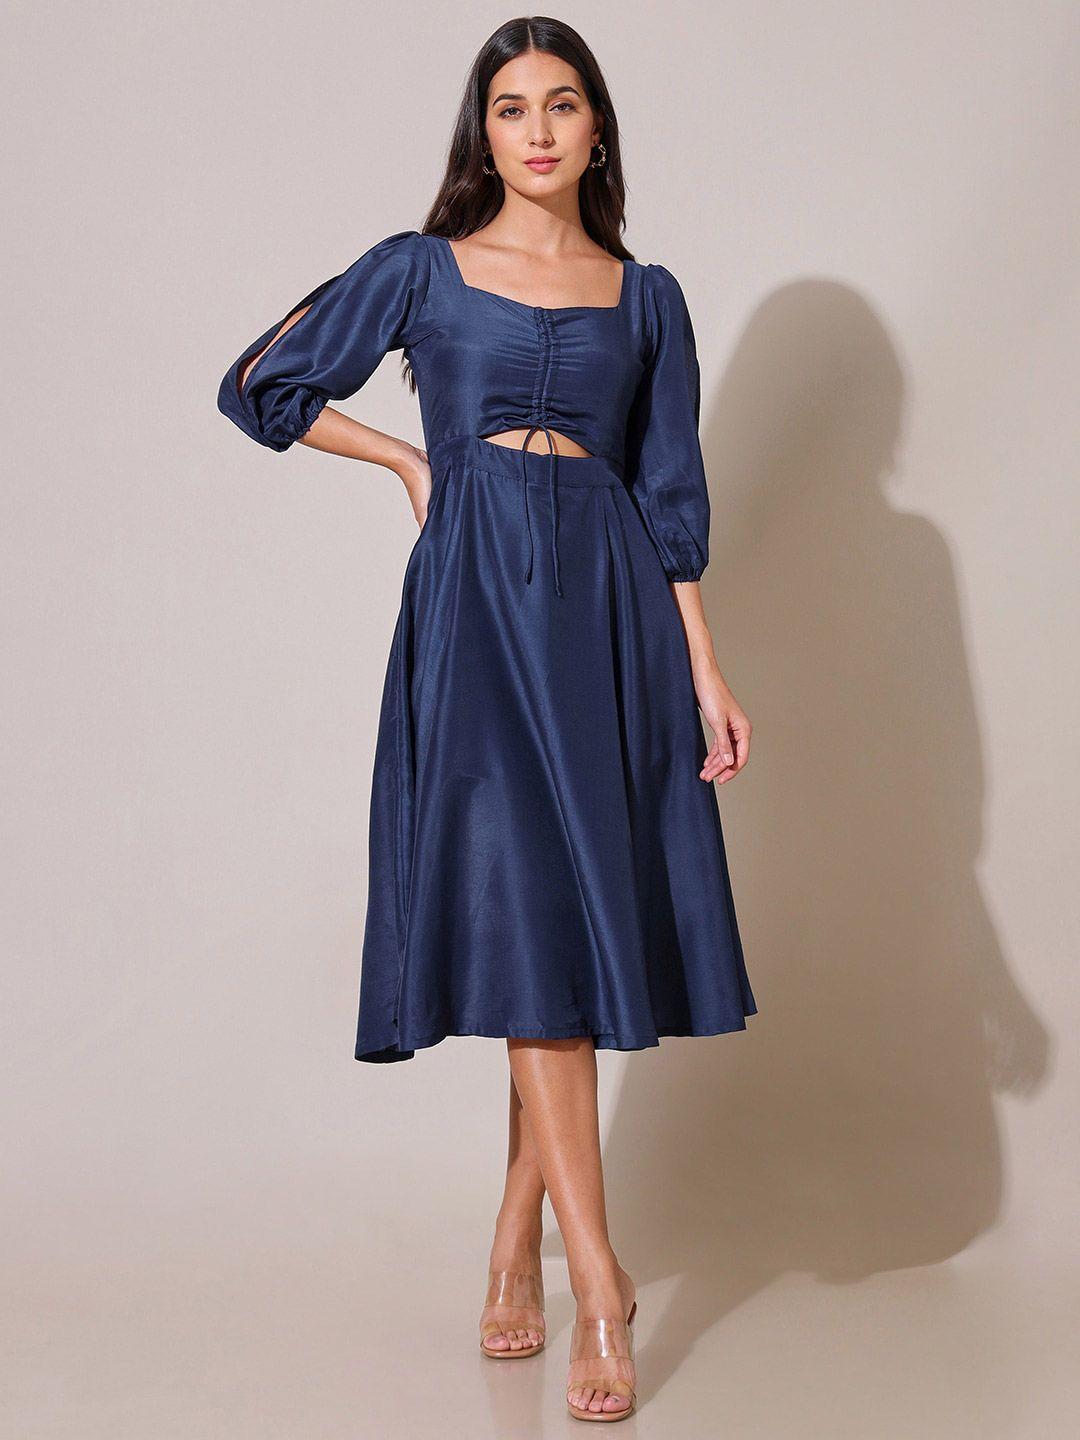 saaki slit sleeves cut-outs detail fit & flare dress